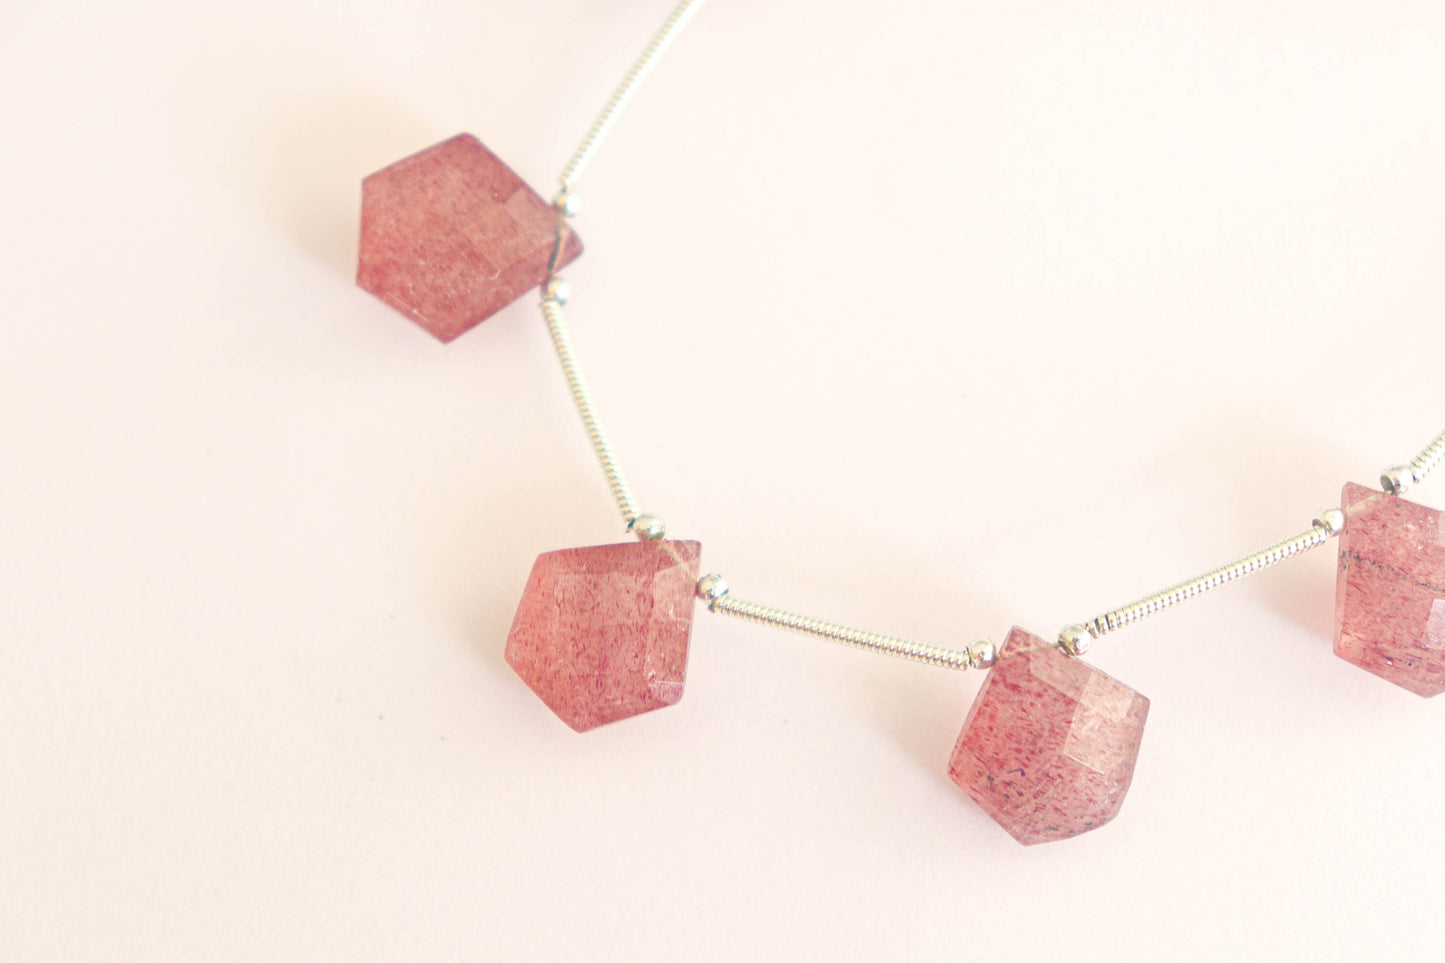 Natural Pink Strawberry Quartz Pentagon Shape faceted Drops, 13x12mm, 8 Pieces, Natural Gemstone for Jewelry, Beadsforyourjewellery